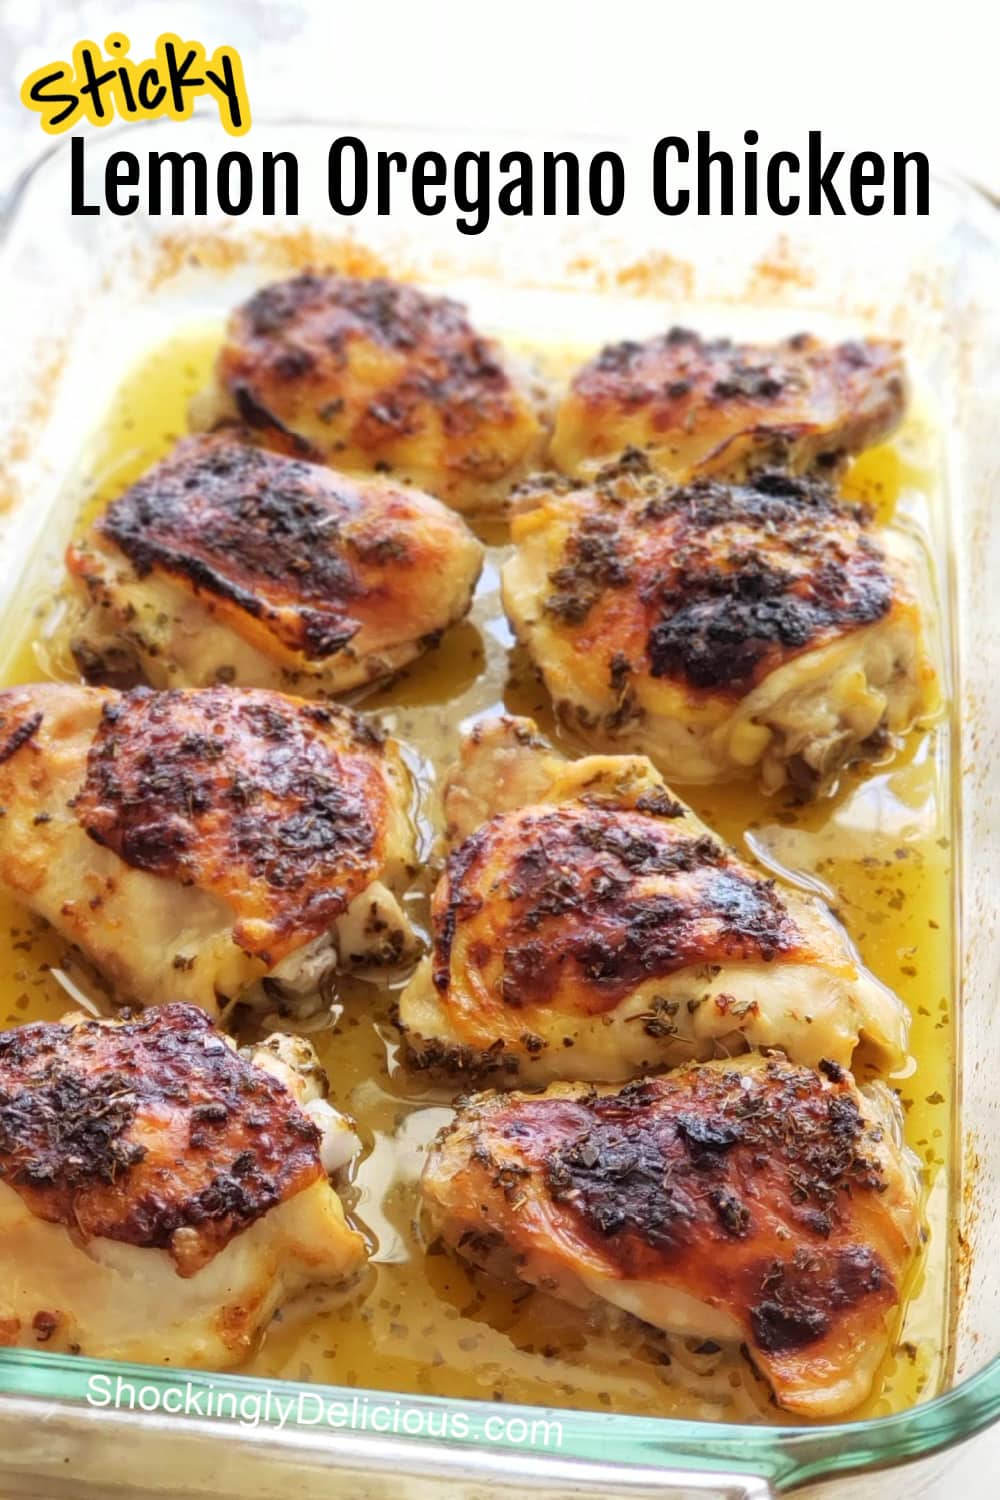 Recipe title superimposed over 8 pieces of browned chicken in a yellow sauce, in a glass baking dish